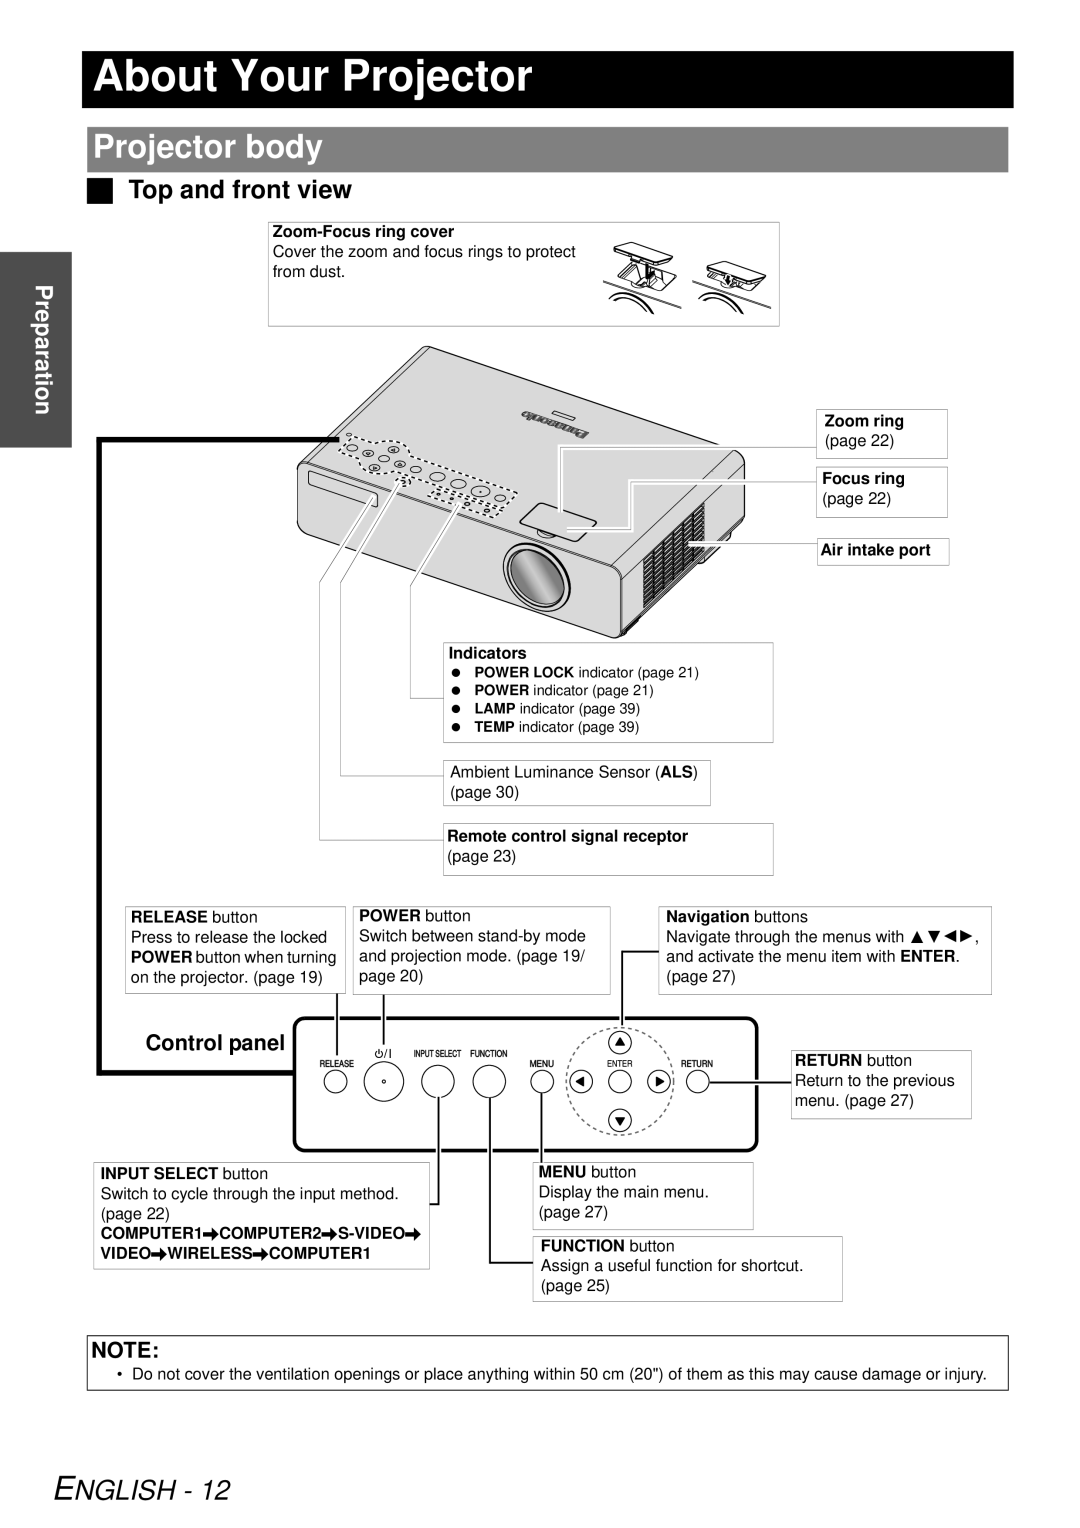 Panasonic PT-LB78U manual About Your Projector, Projector body, Top and front view, English, Preparation 